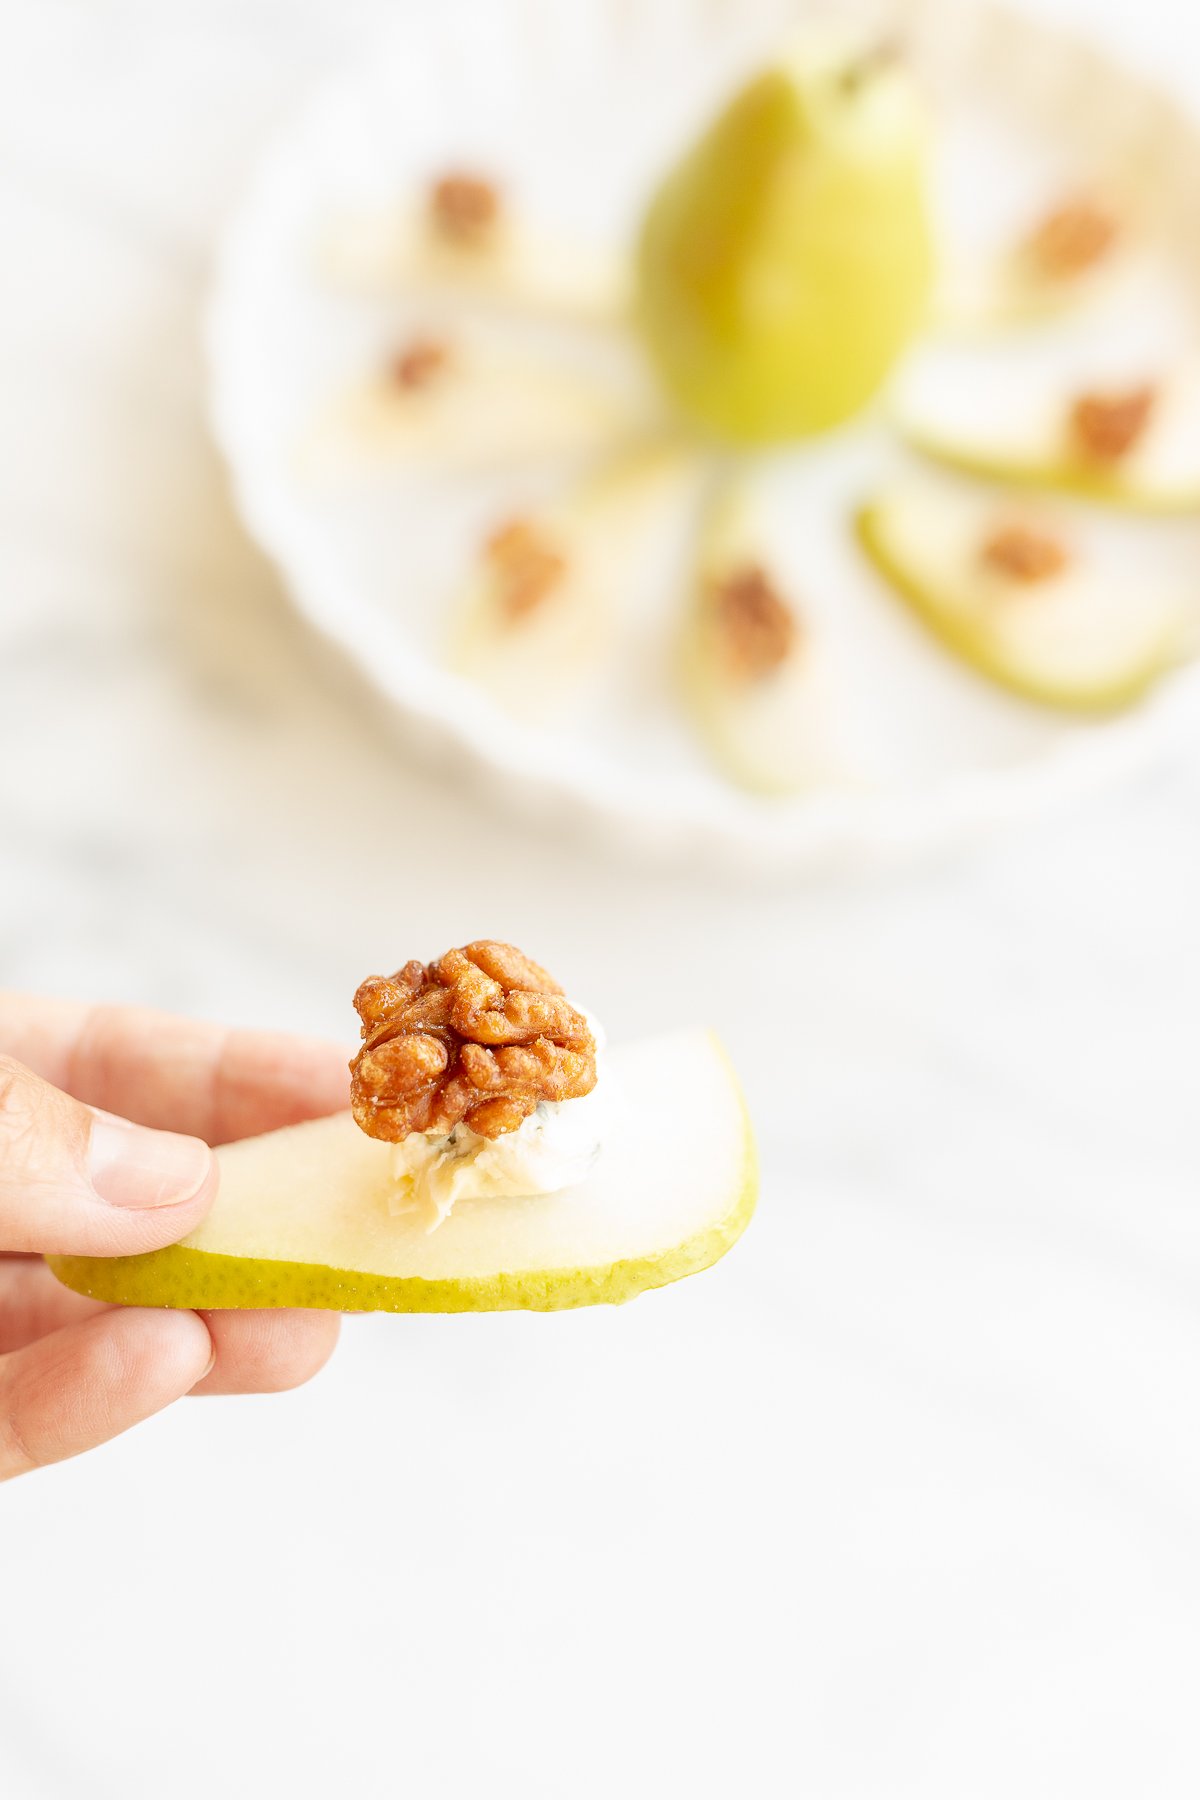 A hand holding a slice of pear topped with a walnut and blue cheese.